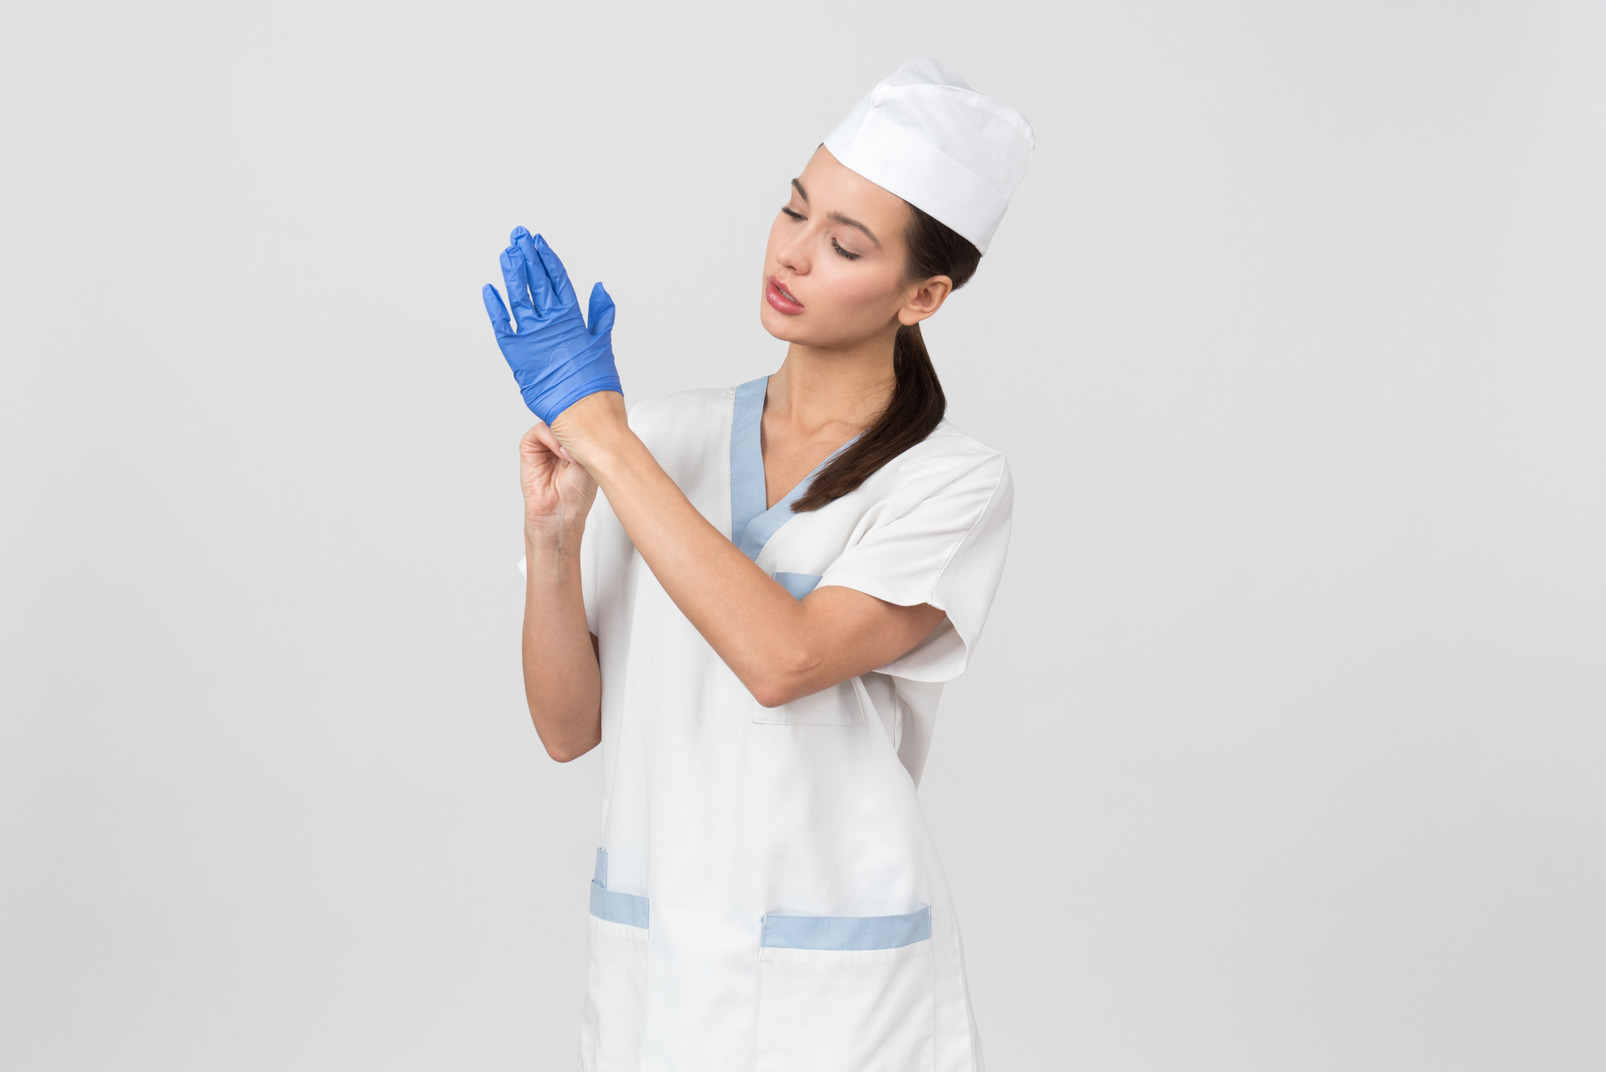 I know how to safely remove disposable gloves